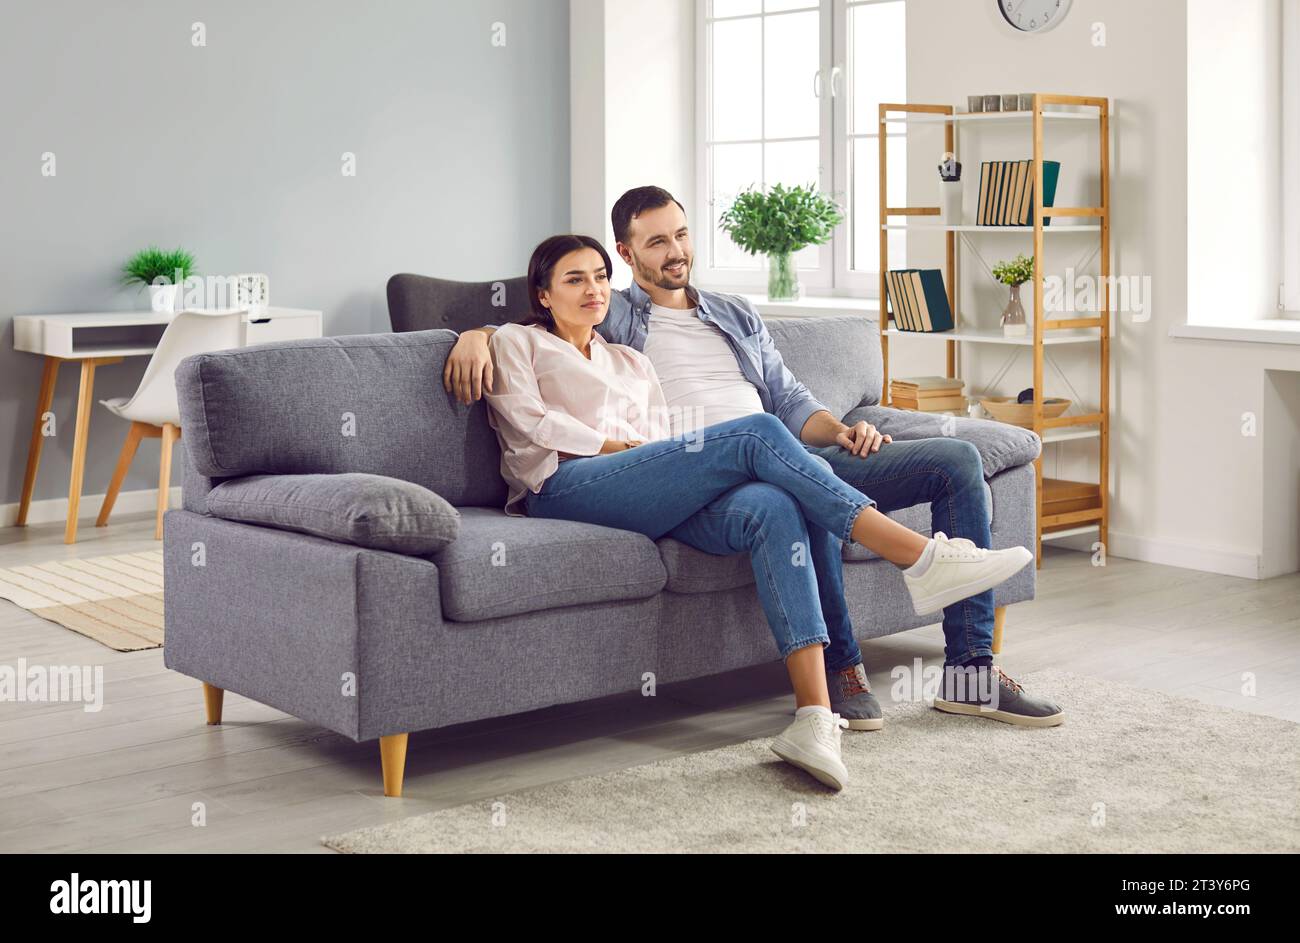 Happy relaxed young family couple sitting on sofa at home Stock Photo